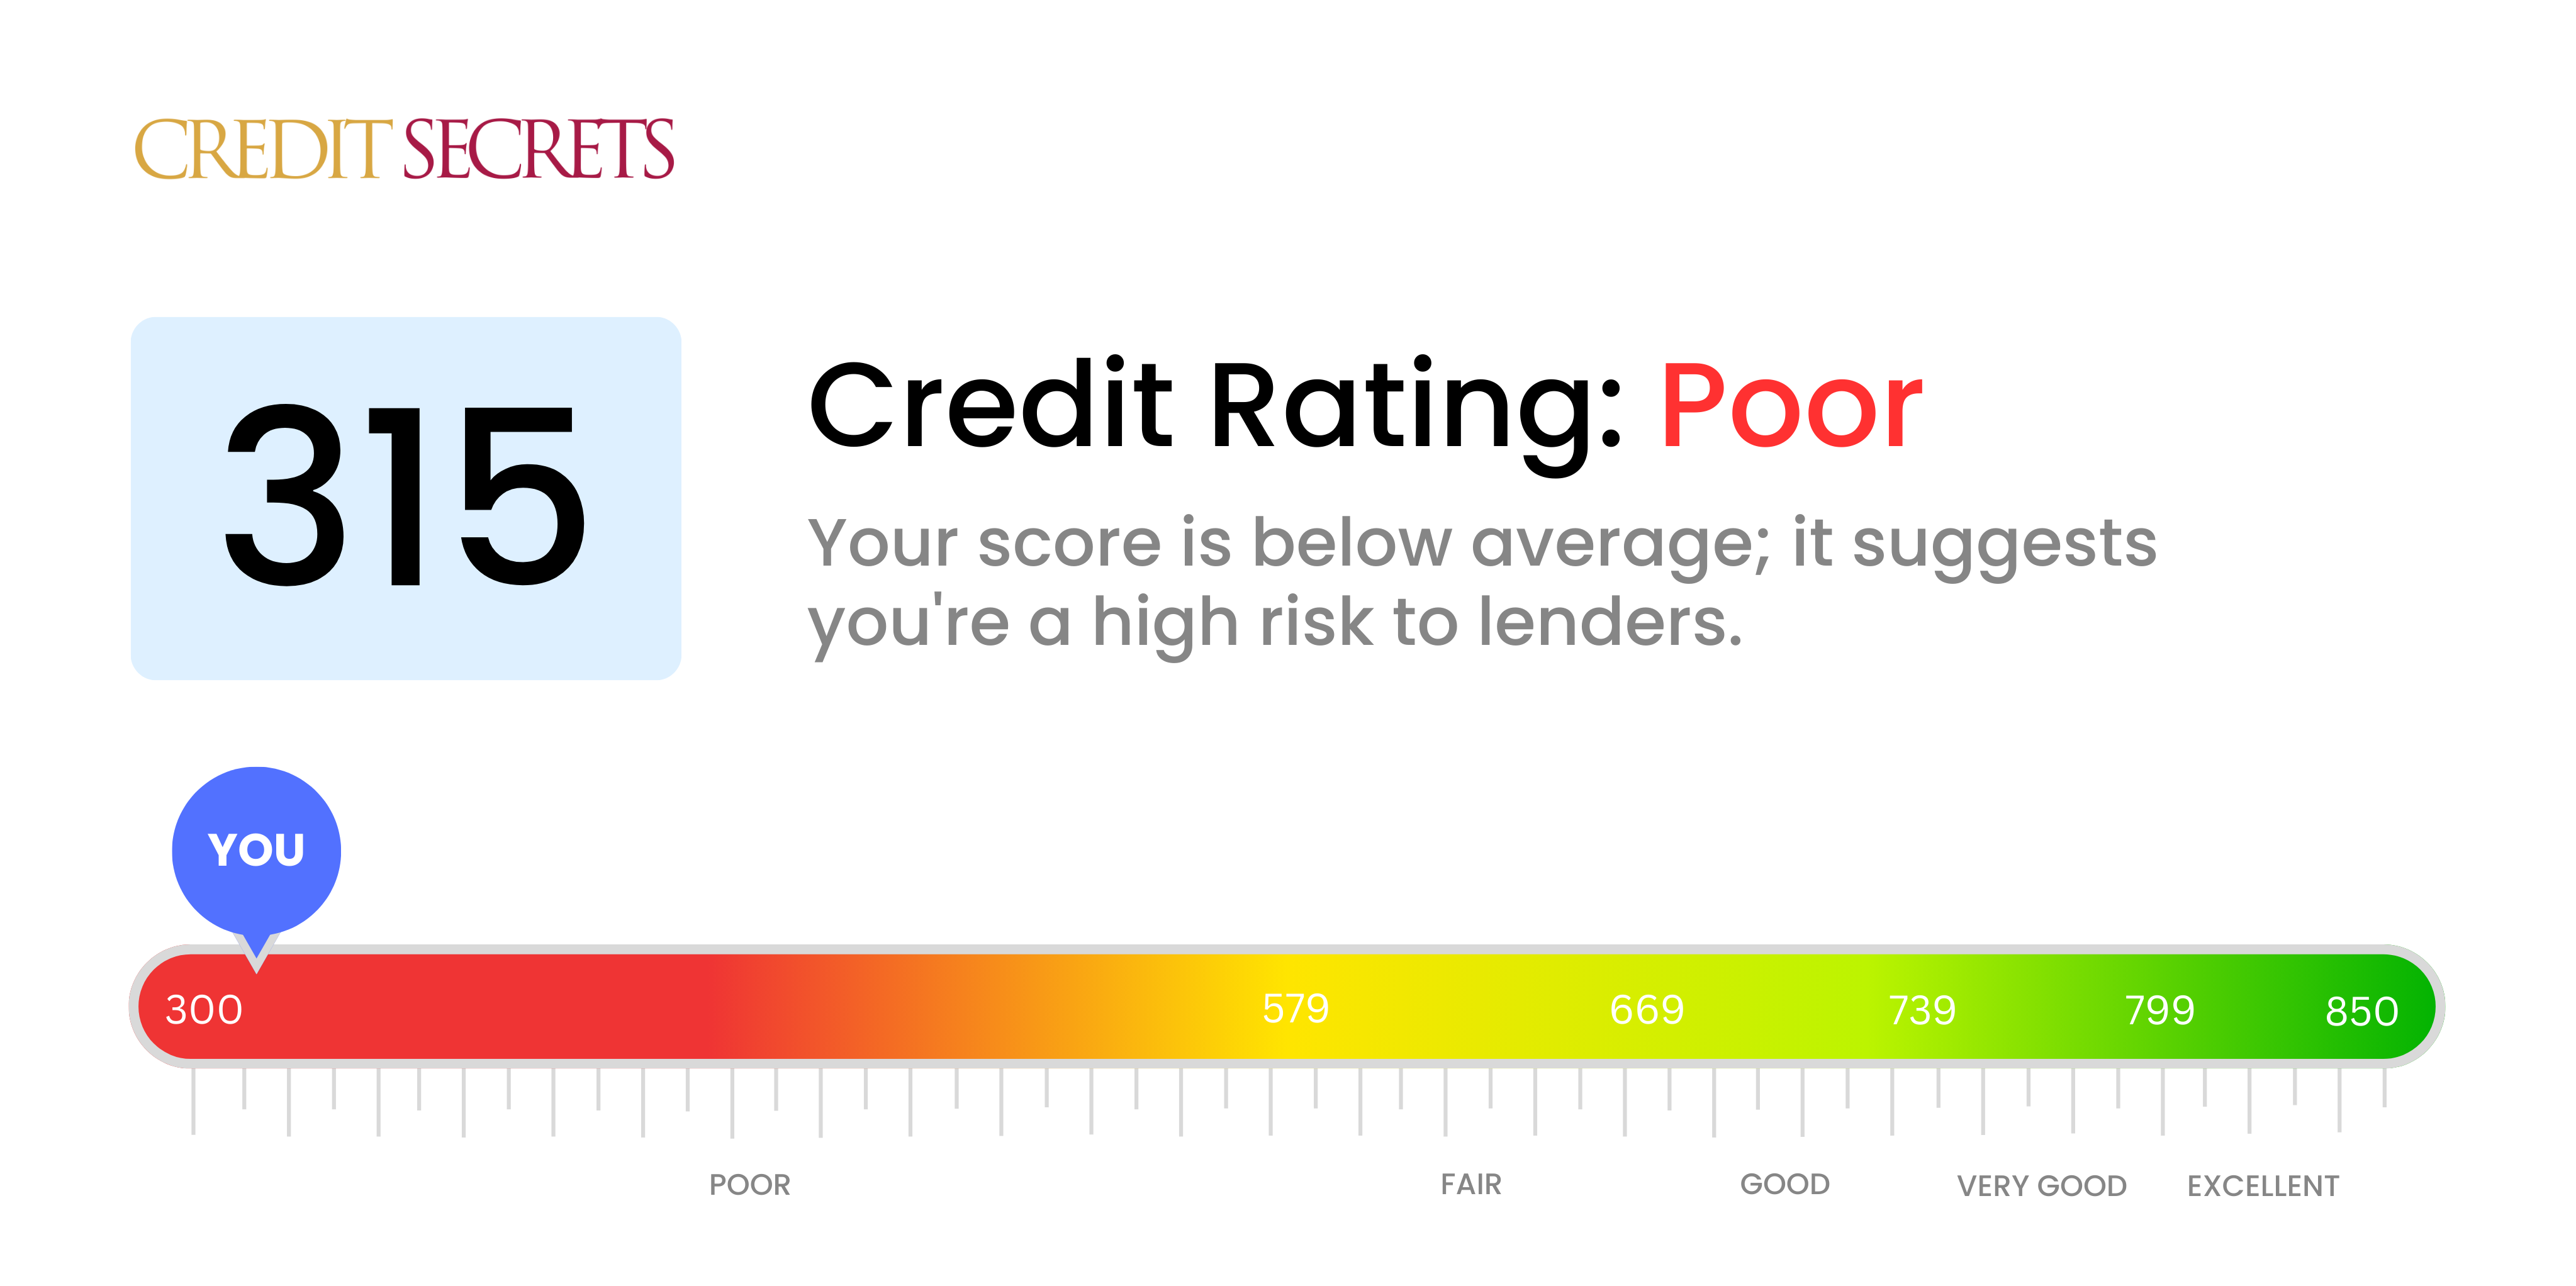 Is 315 a good credit score?